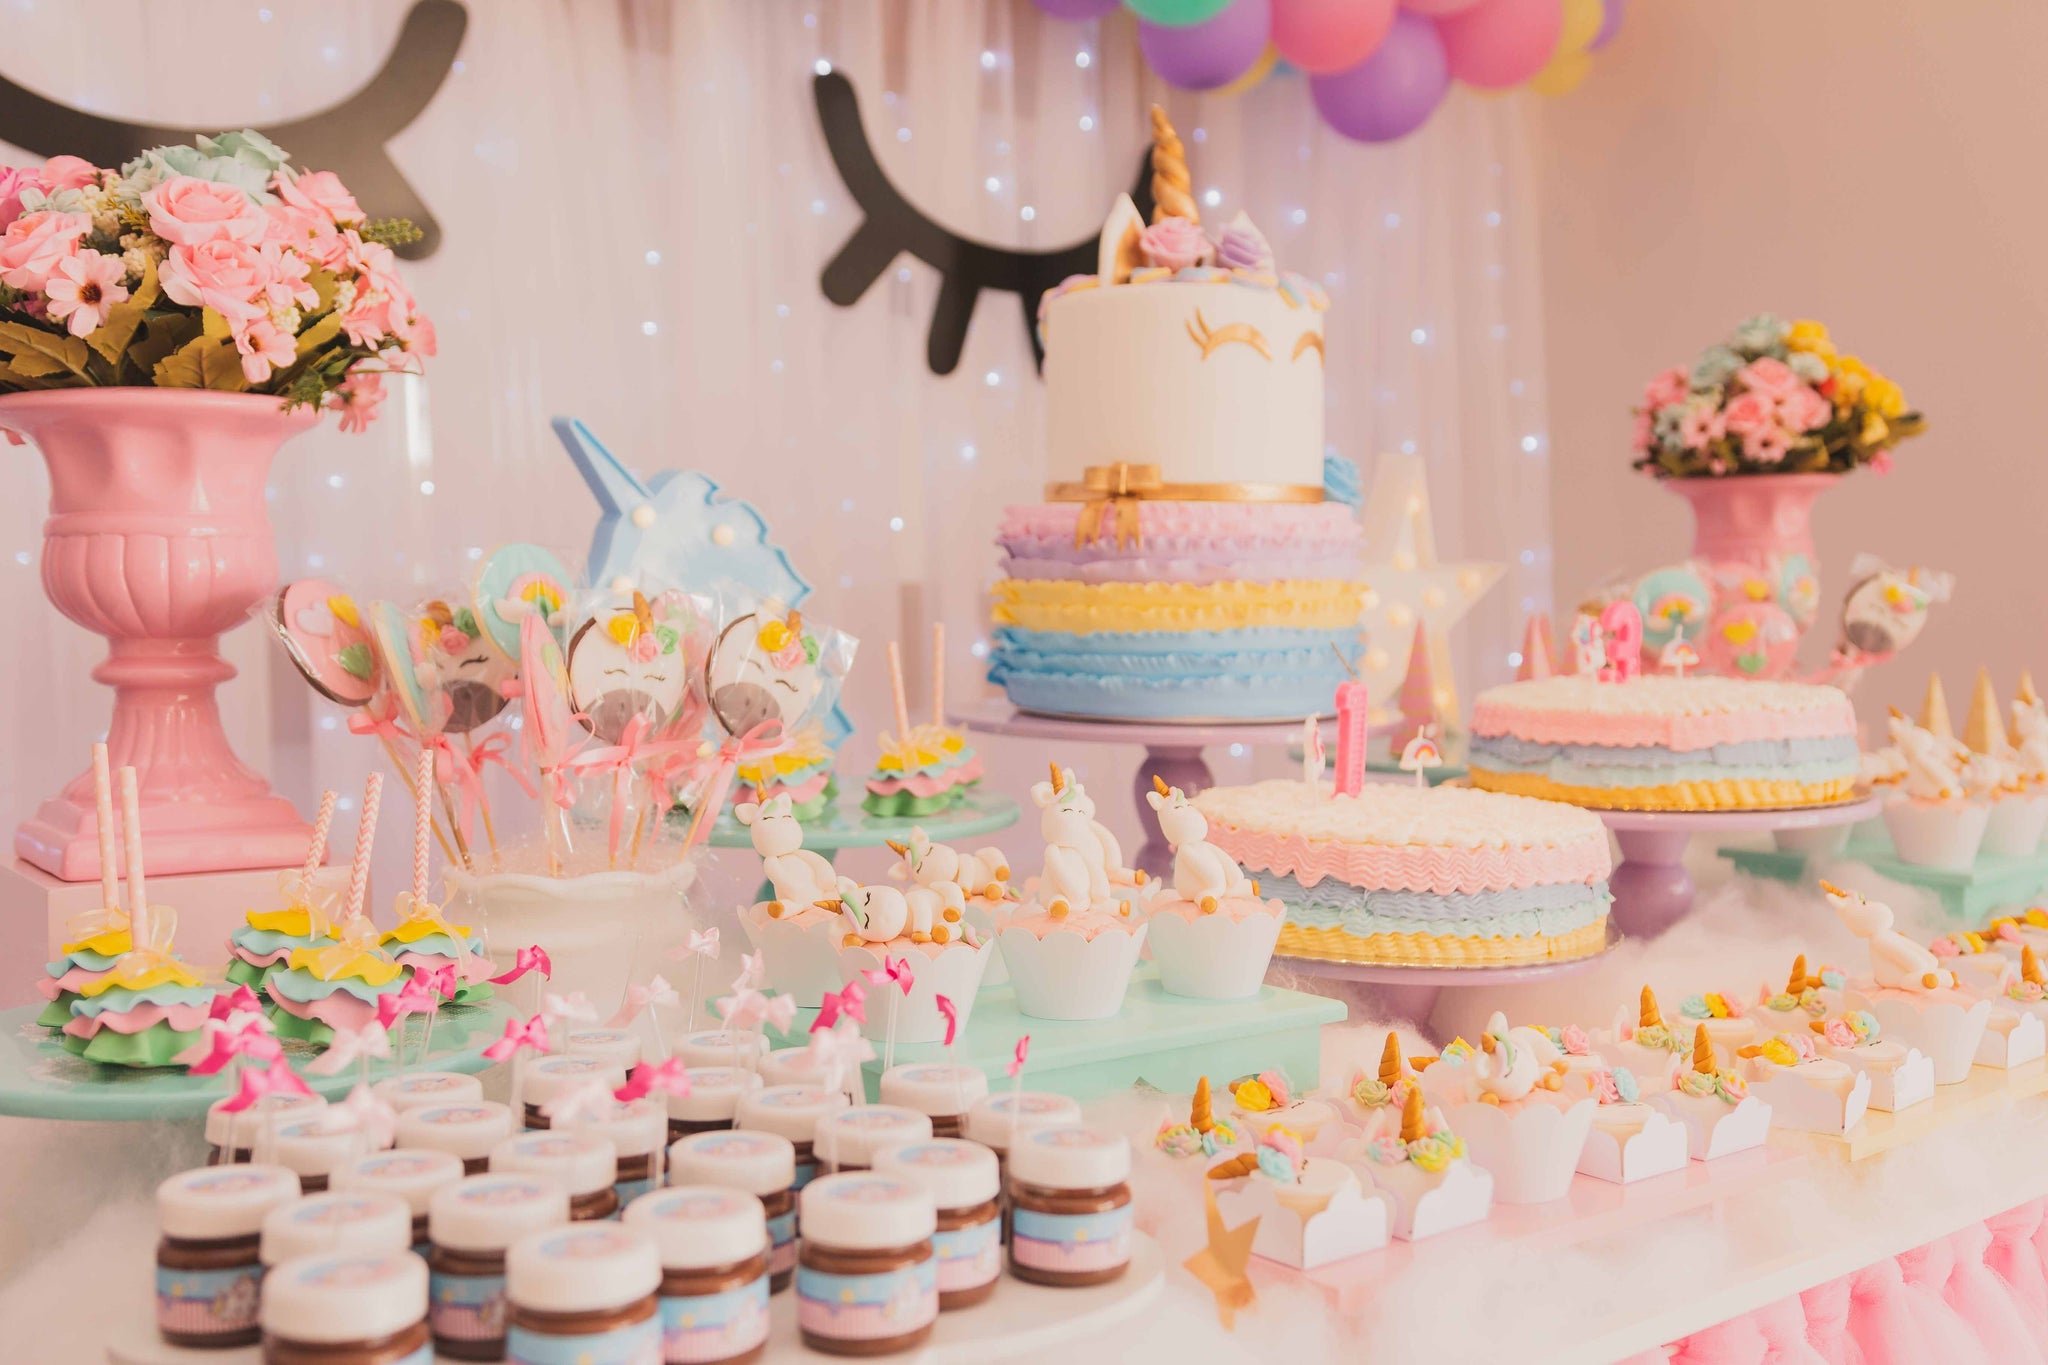 Do’s and Don’ts in Throwing a Children's Party